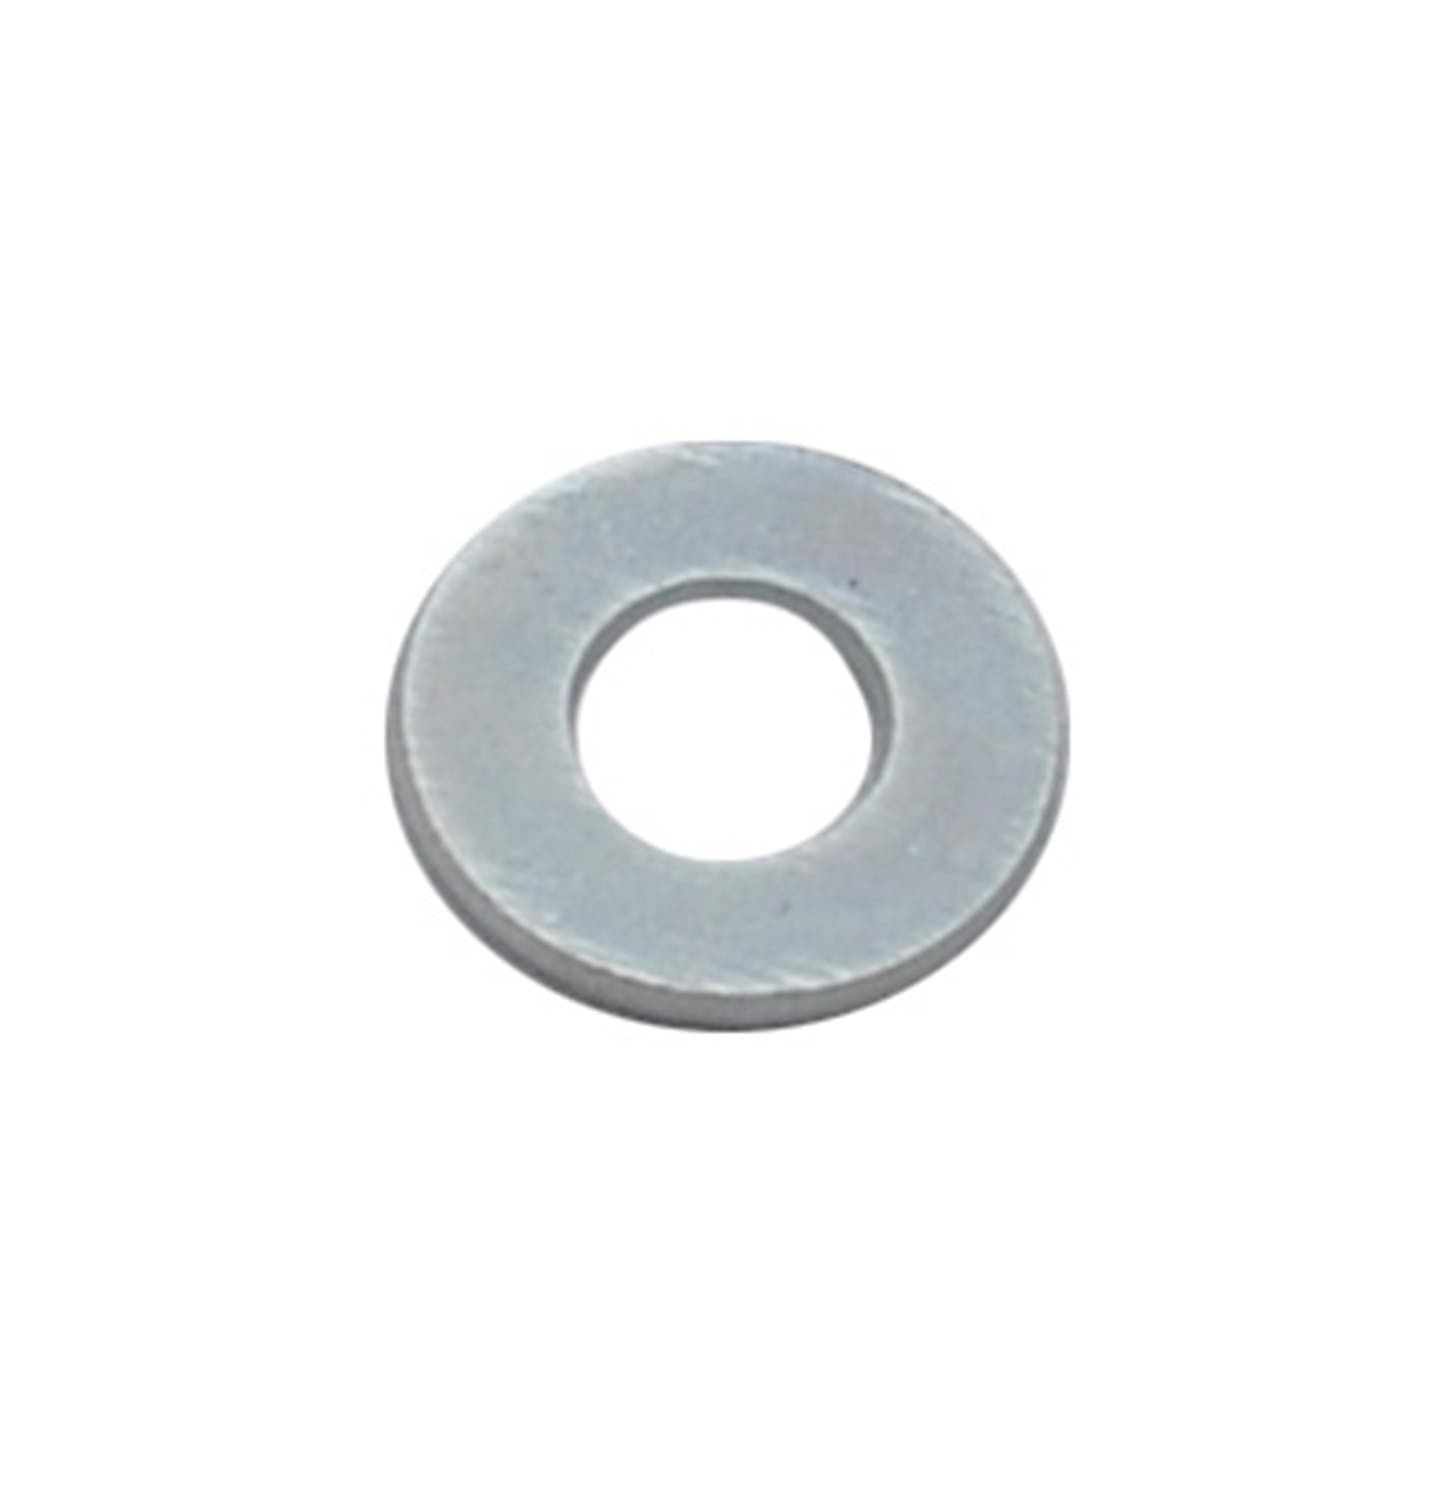 Quick Fuel Technology 46-1QFT Flat Secondary Link Washer